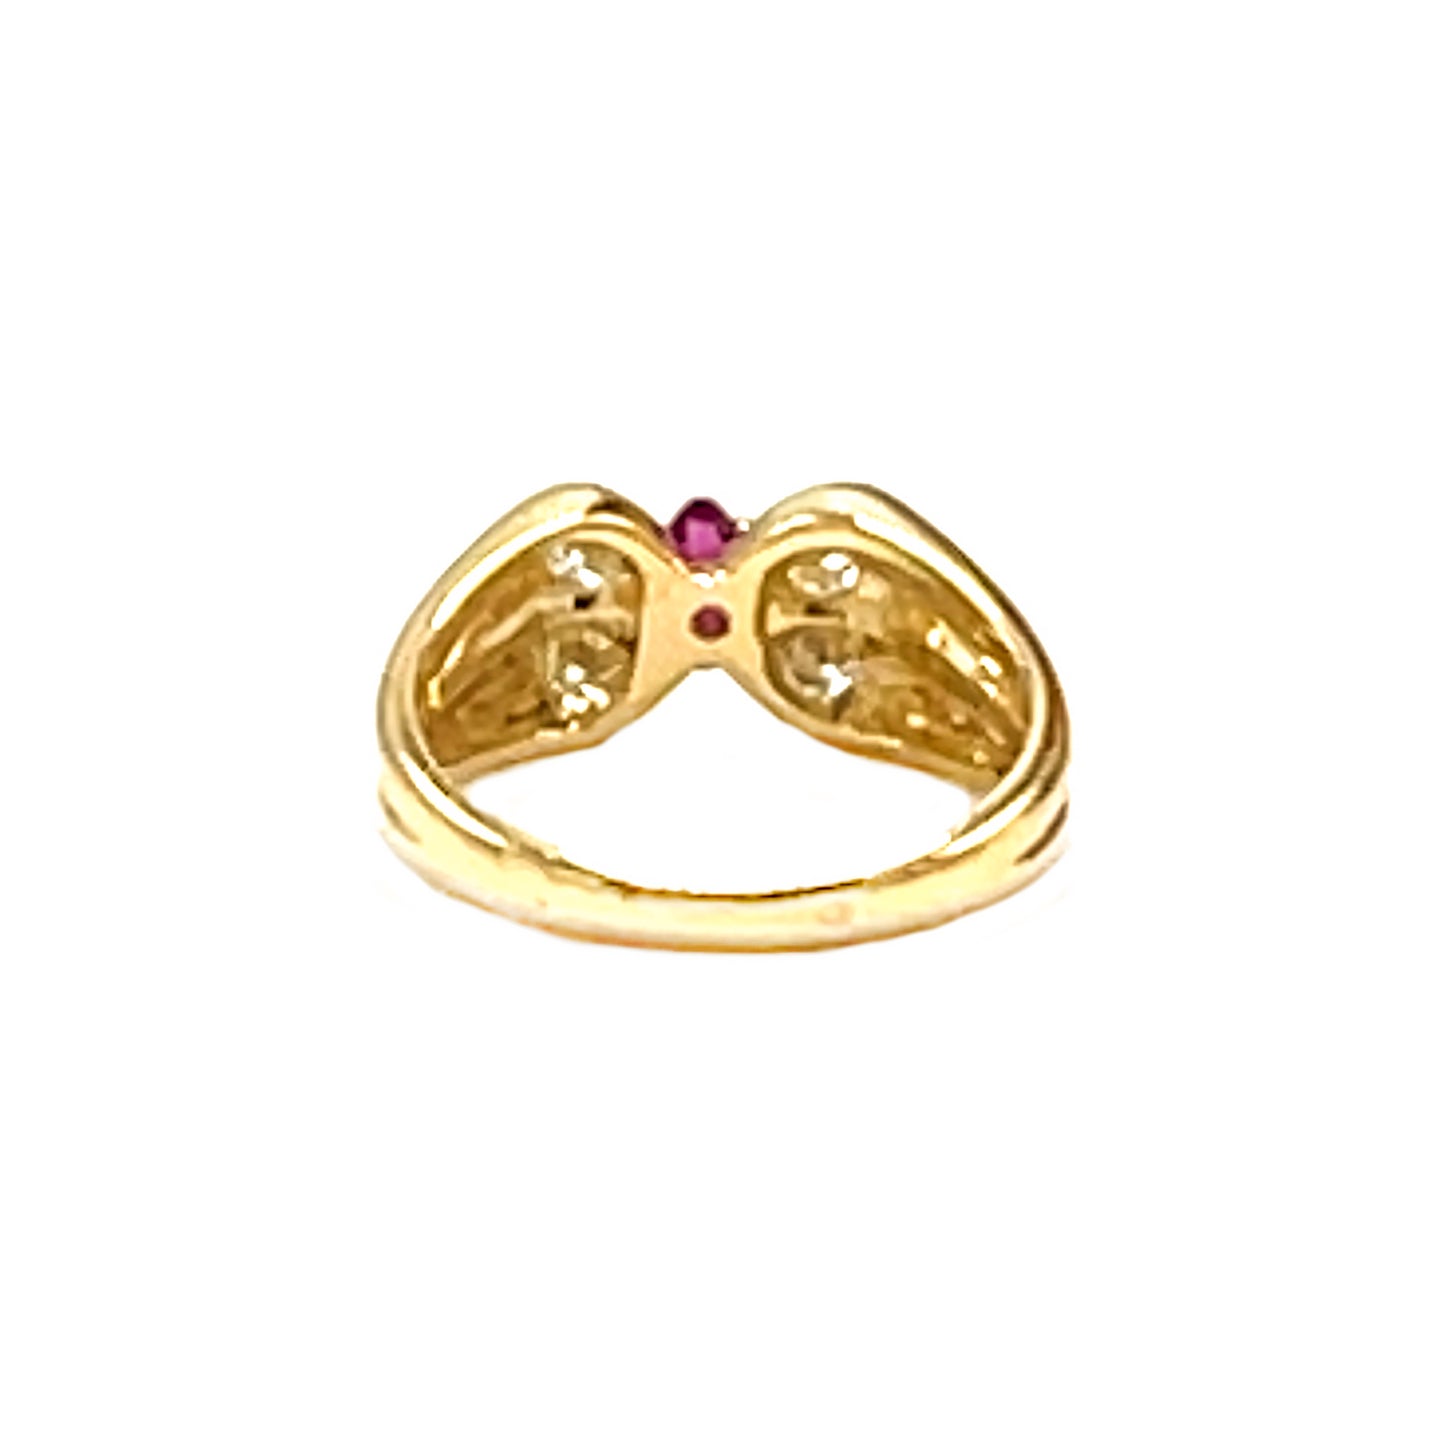 Van Cleef and Arpels Ruby and Diamond Butterfly Ring